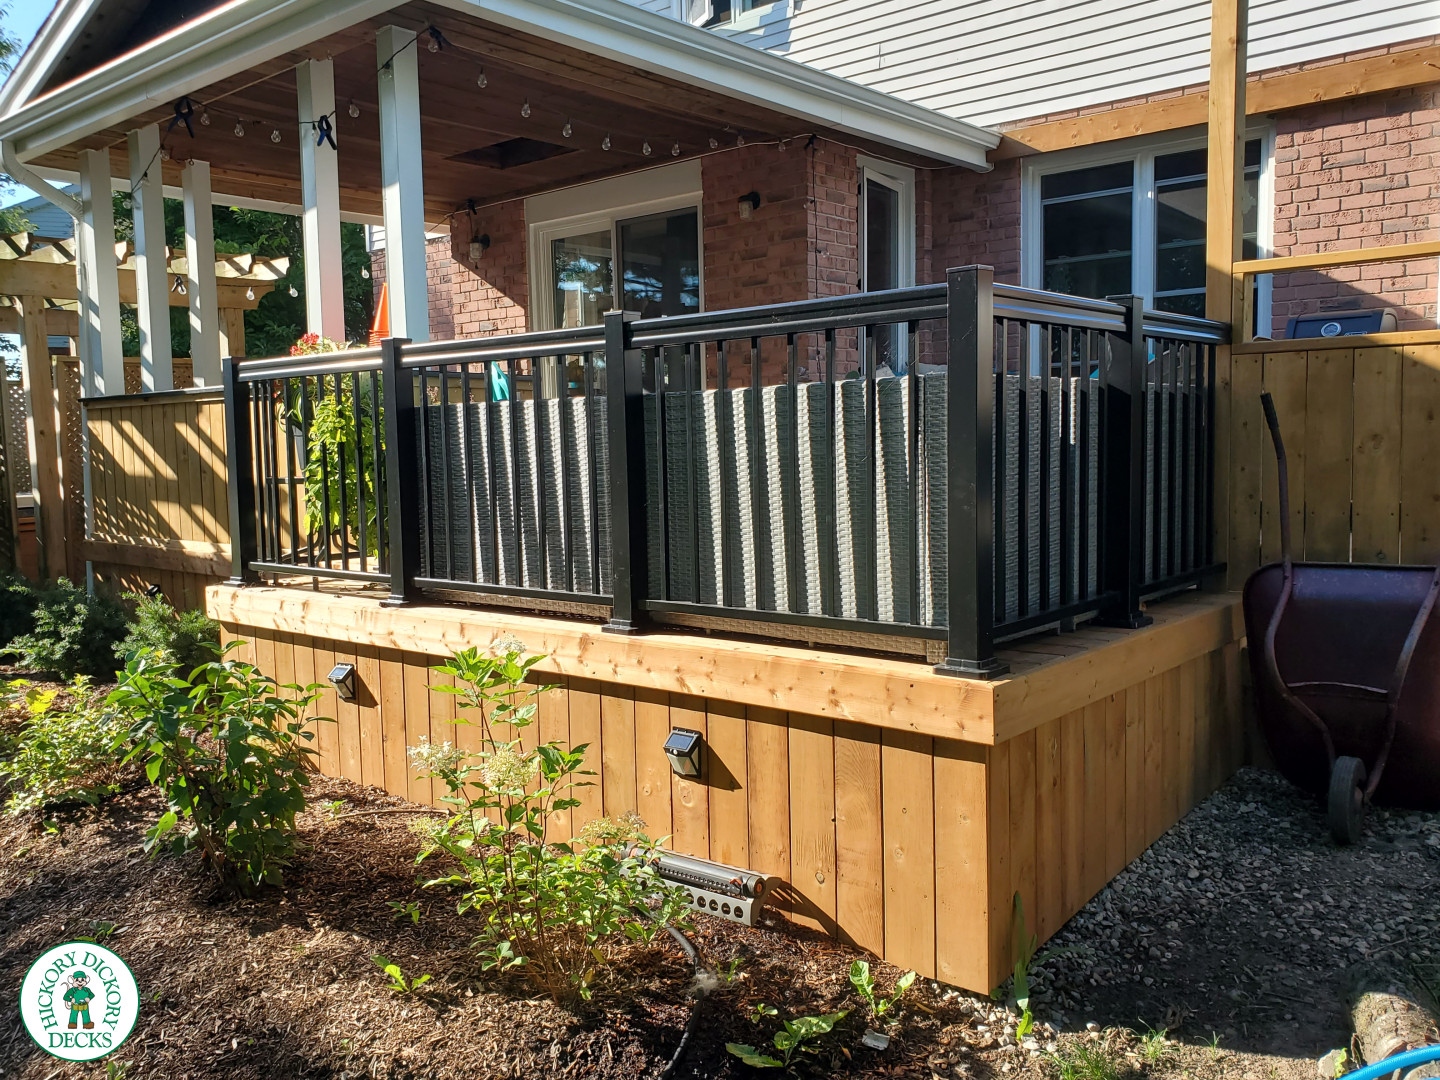 Cedar deck with roof structure that has a built in bar, and aluminum railings with a gate insert.